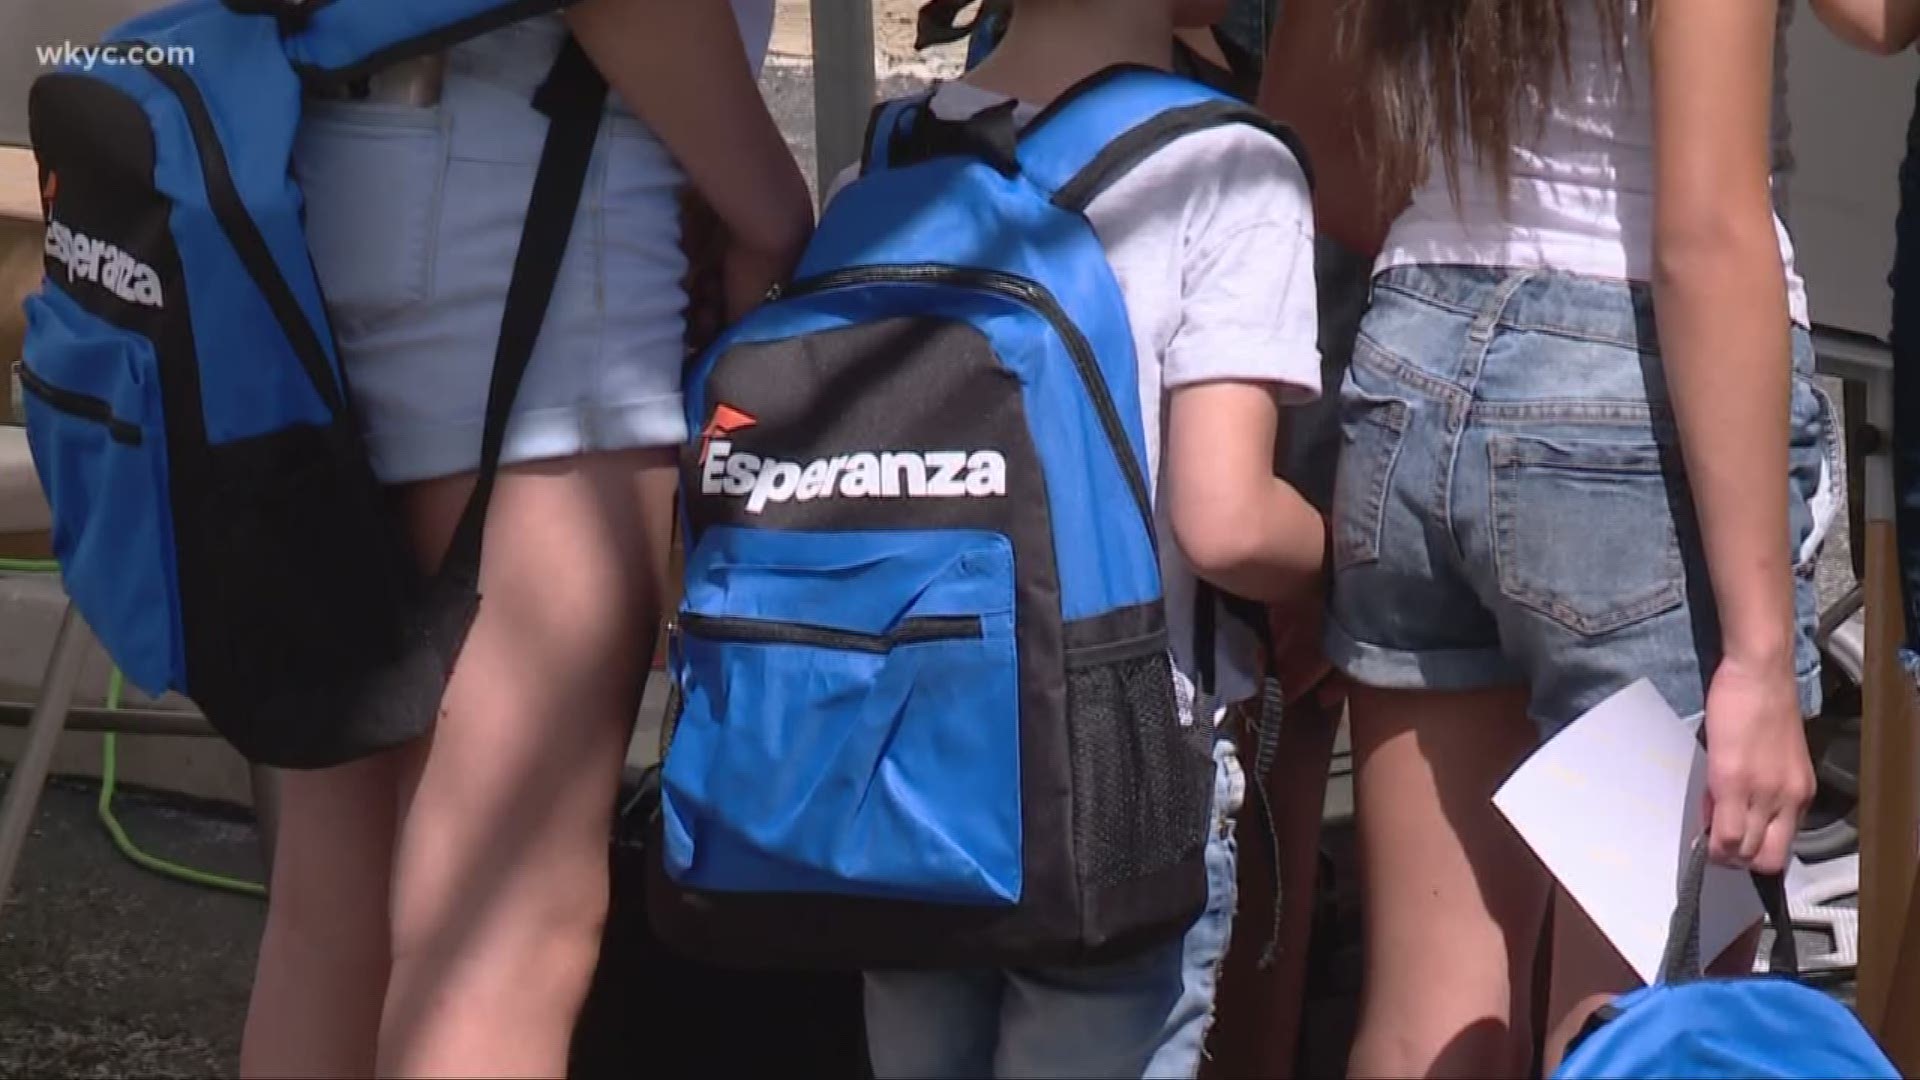 Esperanza gave more than 1,000 kids free backpacks filled with supplies at its annual back-to-school event.